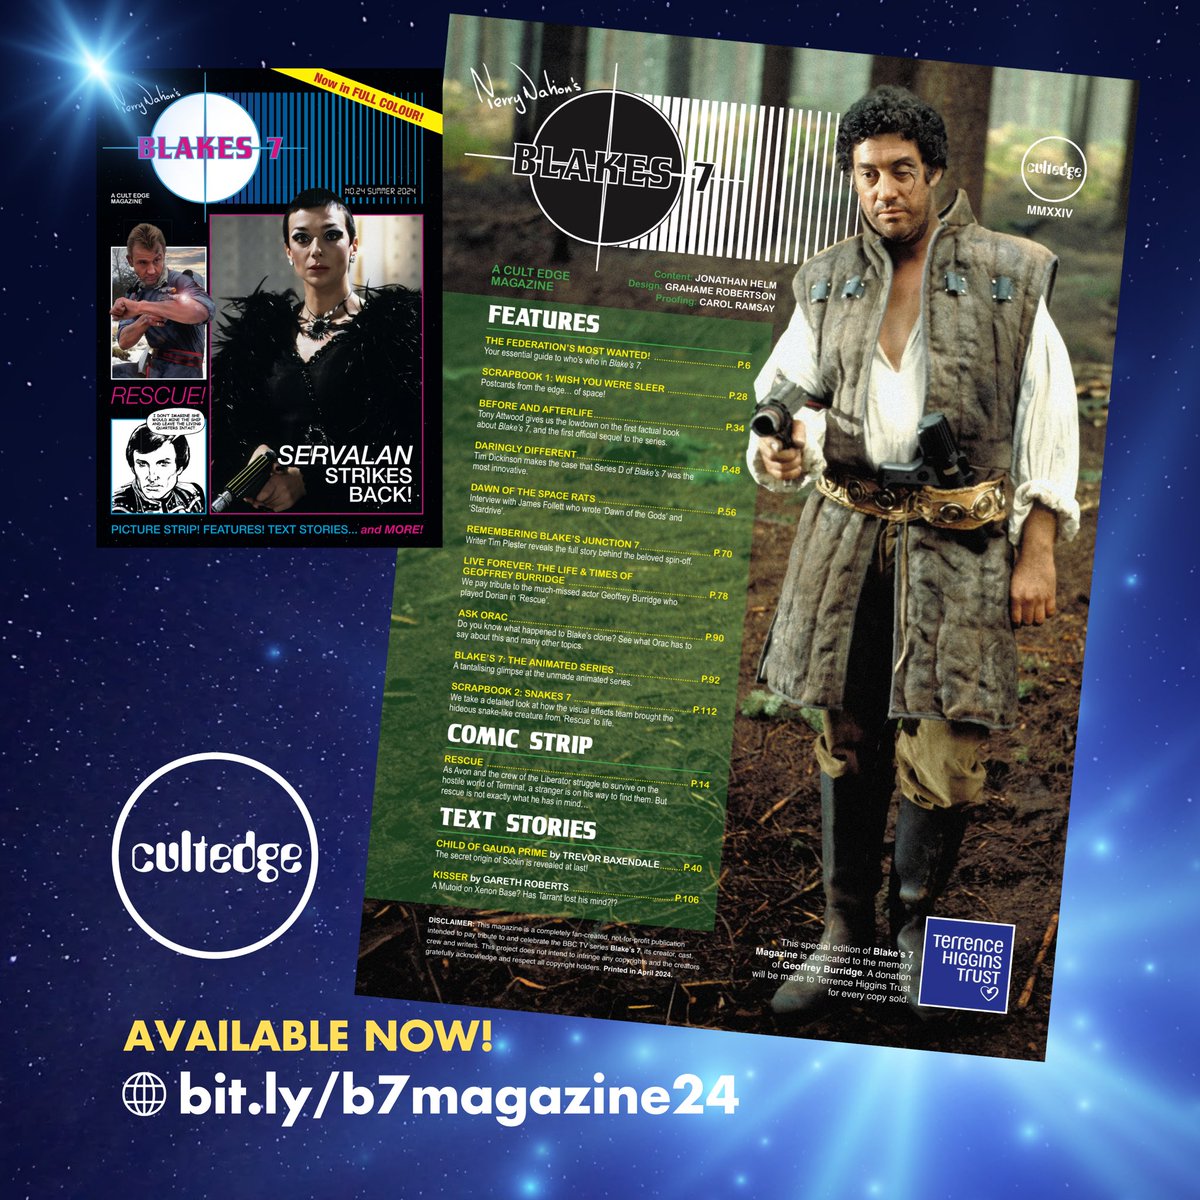 41 years after the last issue, the brand new 124 page edition of #Blakes7 Magazine is out now. Here’s a peek at the contents page. You can claim a 15% discount by using code SUNSHINE15 at checkout (code expires on Friday at midnight!). Grab your copy from bit.ly/b7magazine24